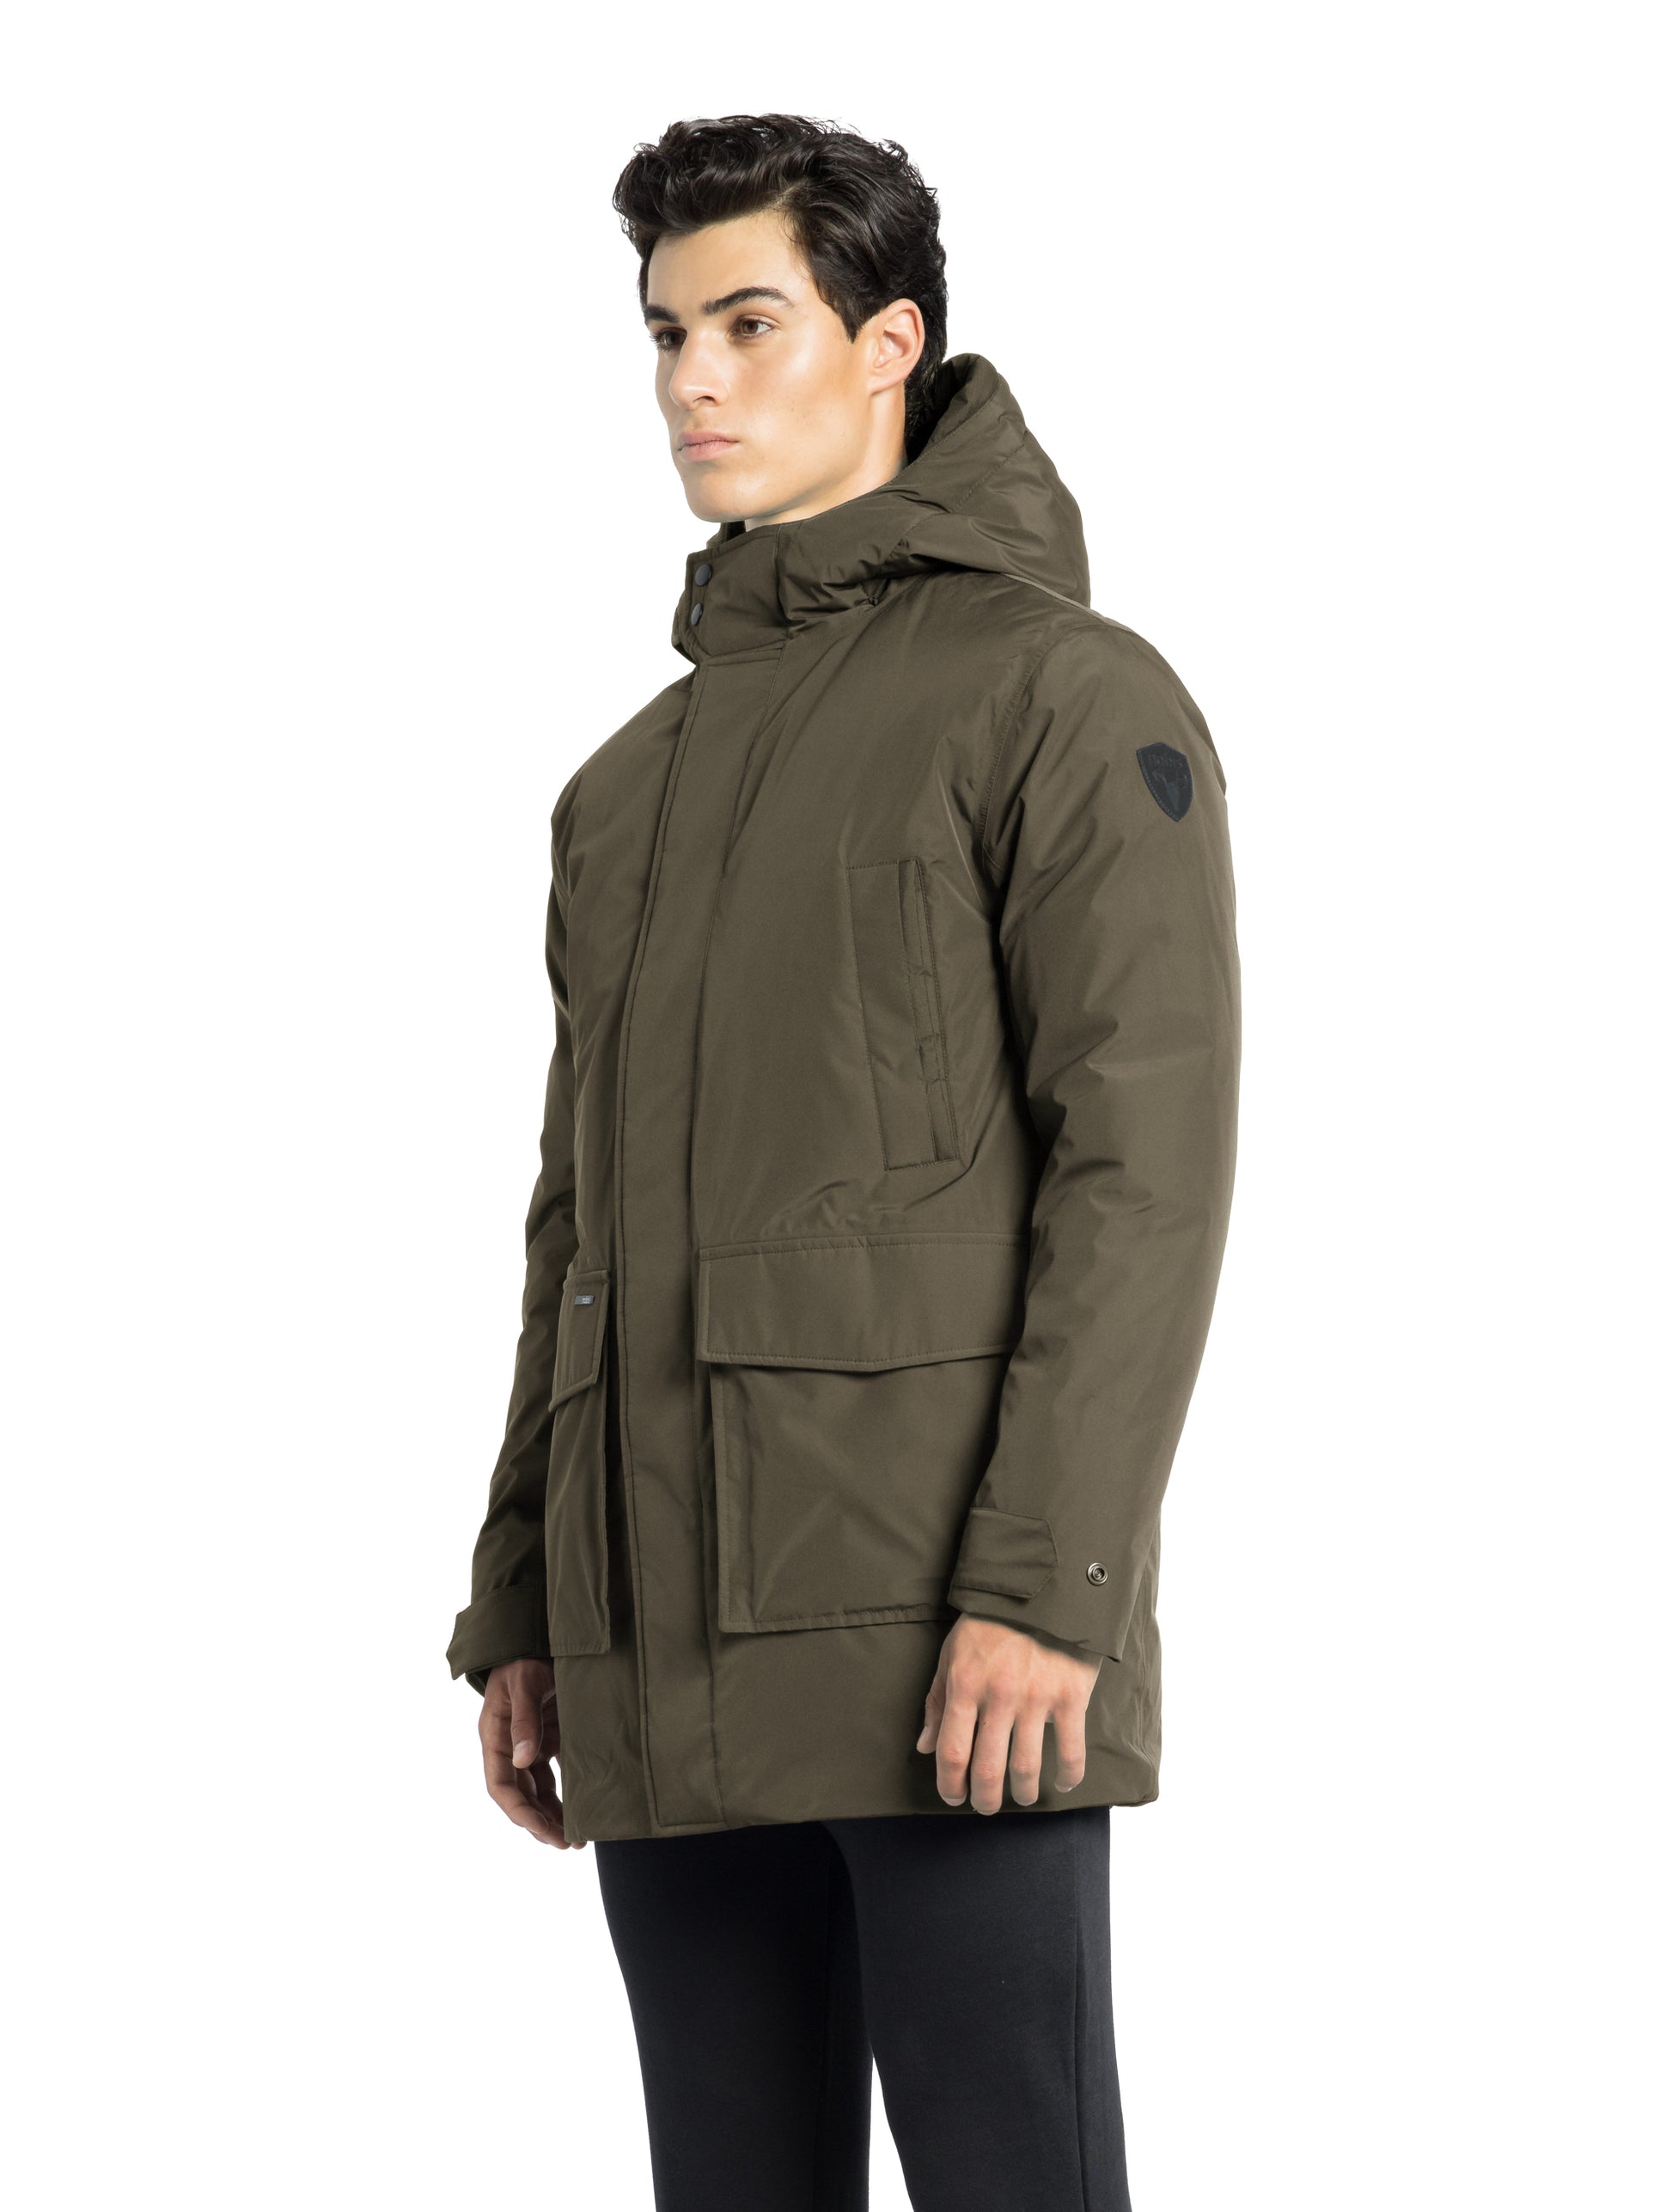 Kason Men's Light Down Parka in thigh length, premium 3-ply micro denier and stretch ripstop fabrication, Premium Canadian origin White Duck Down insulation, non-removable down-filled hood, two-way centre-front zipper, magnetic closure wind flap, fleece-lined pockets at chest and waist, flap pockets at waist, pit zipper vents, in Fatigue